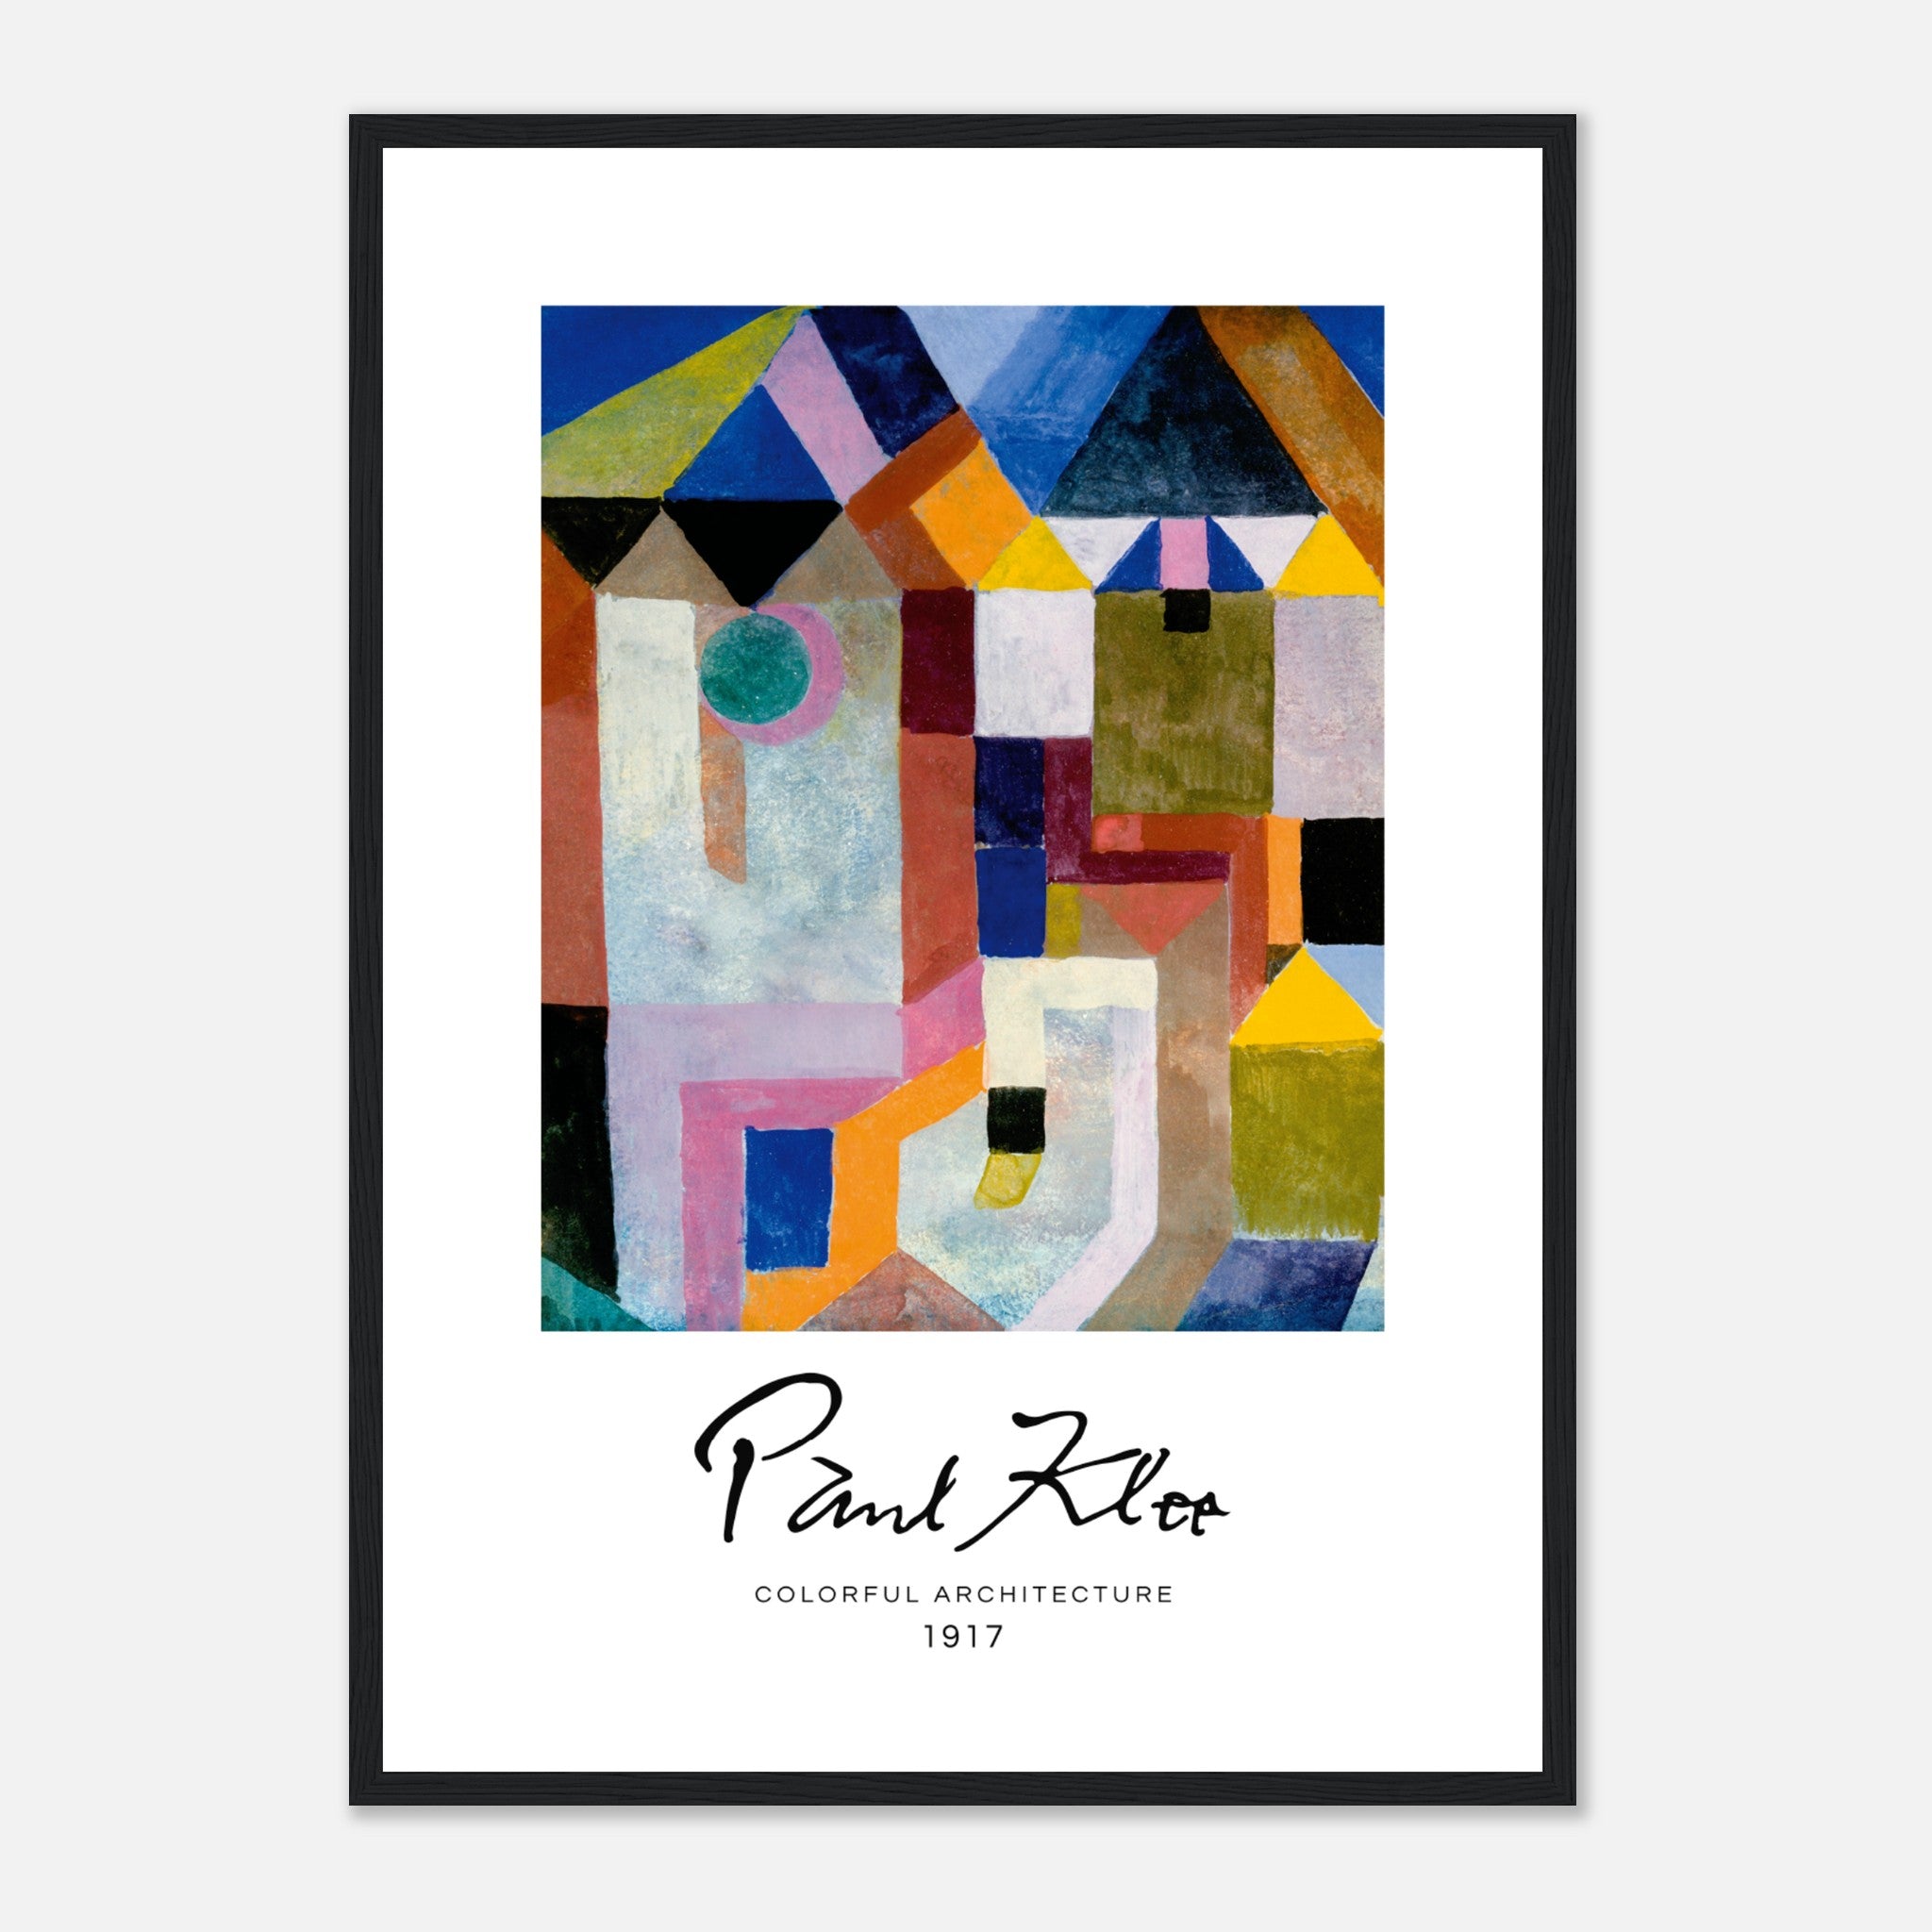 Colorful Architecture by Paul Klee Poster